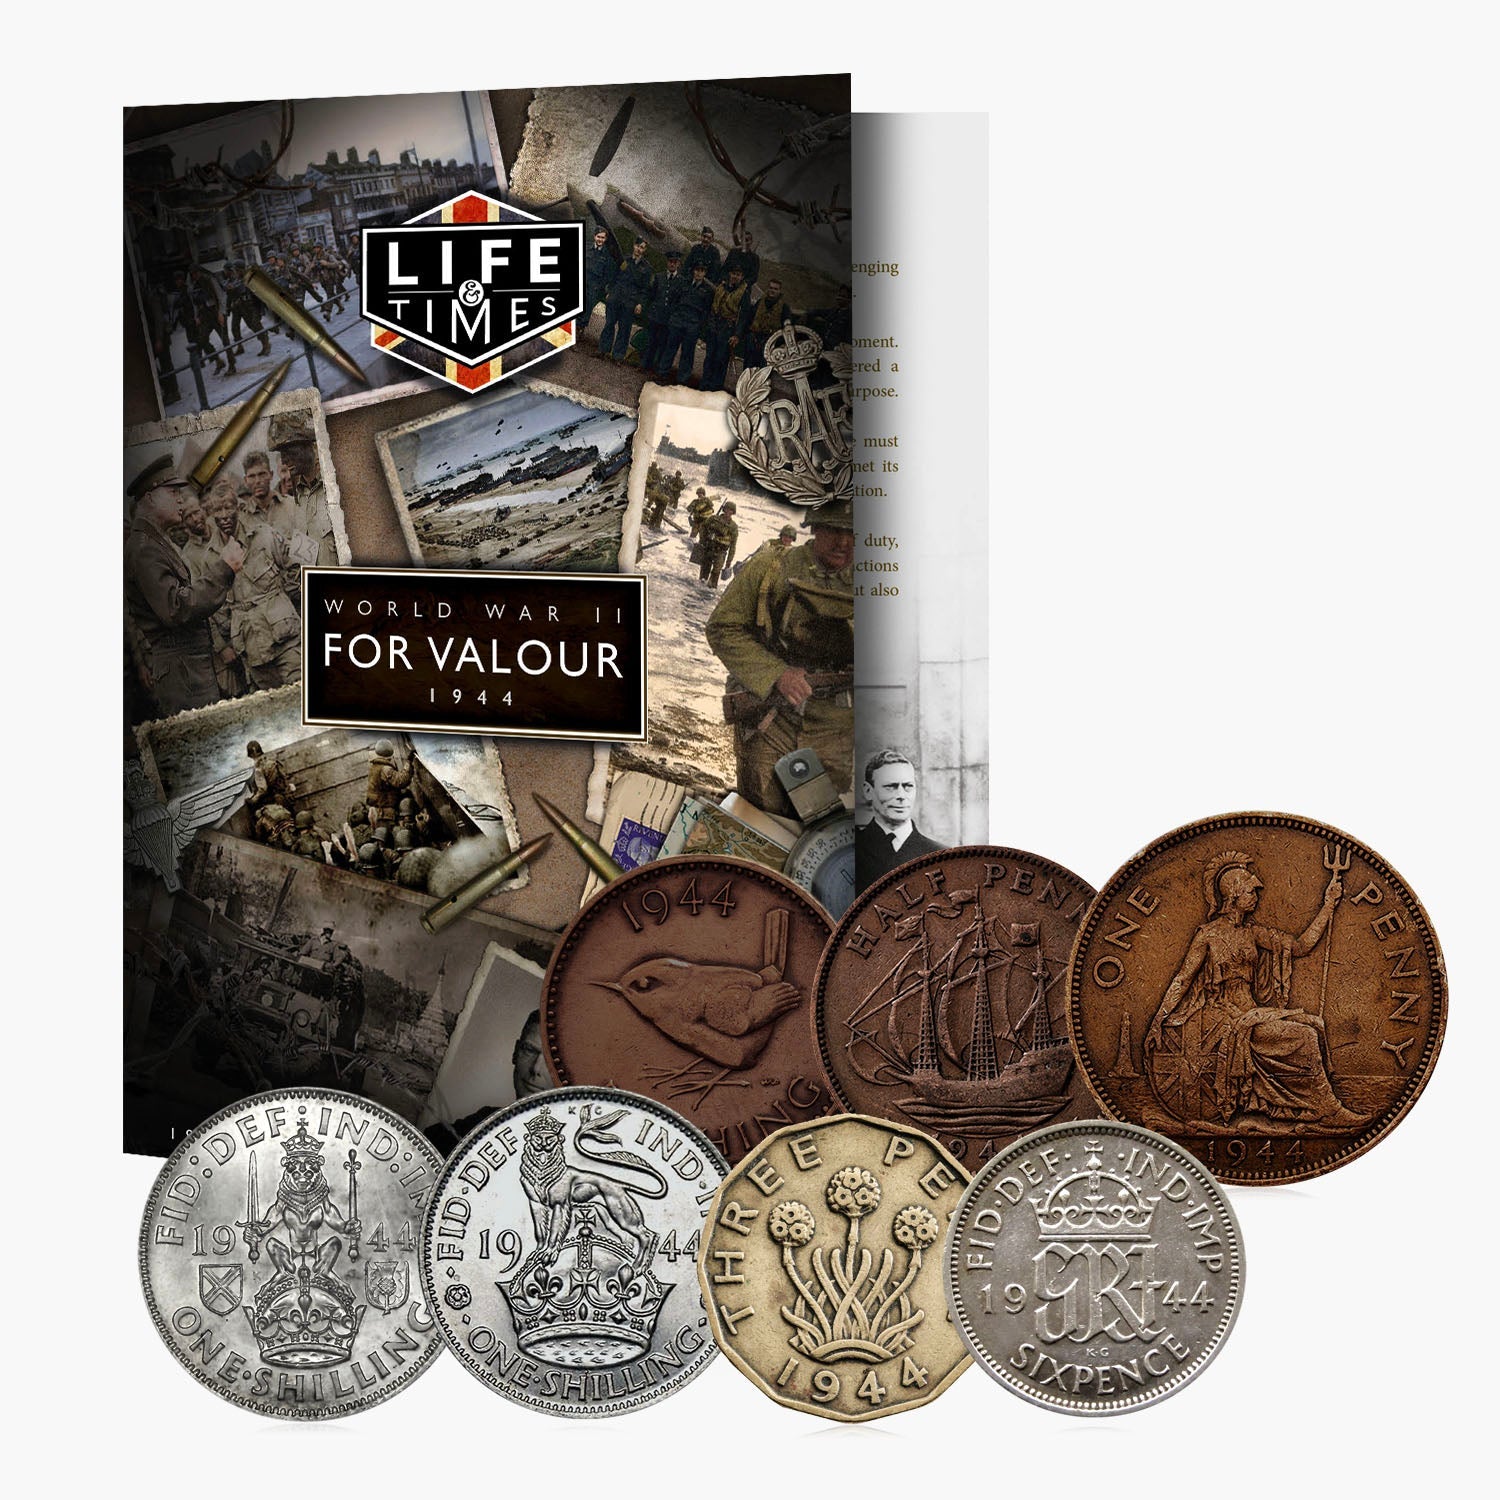 Life & Times WWI and WWII Coin Set Bundle